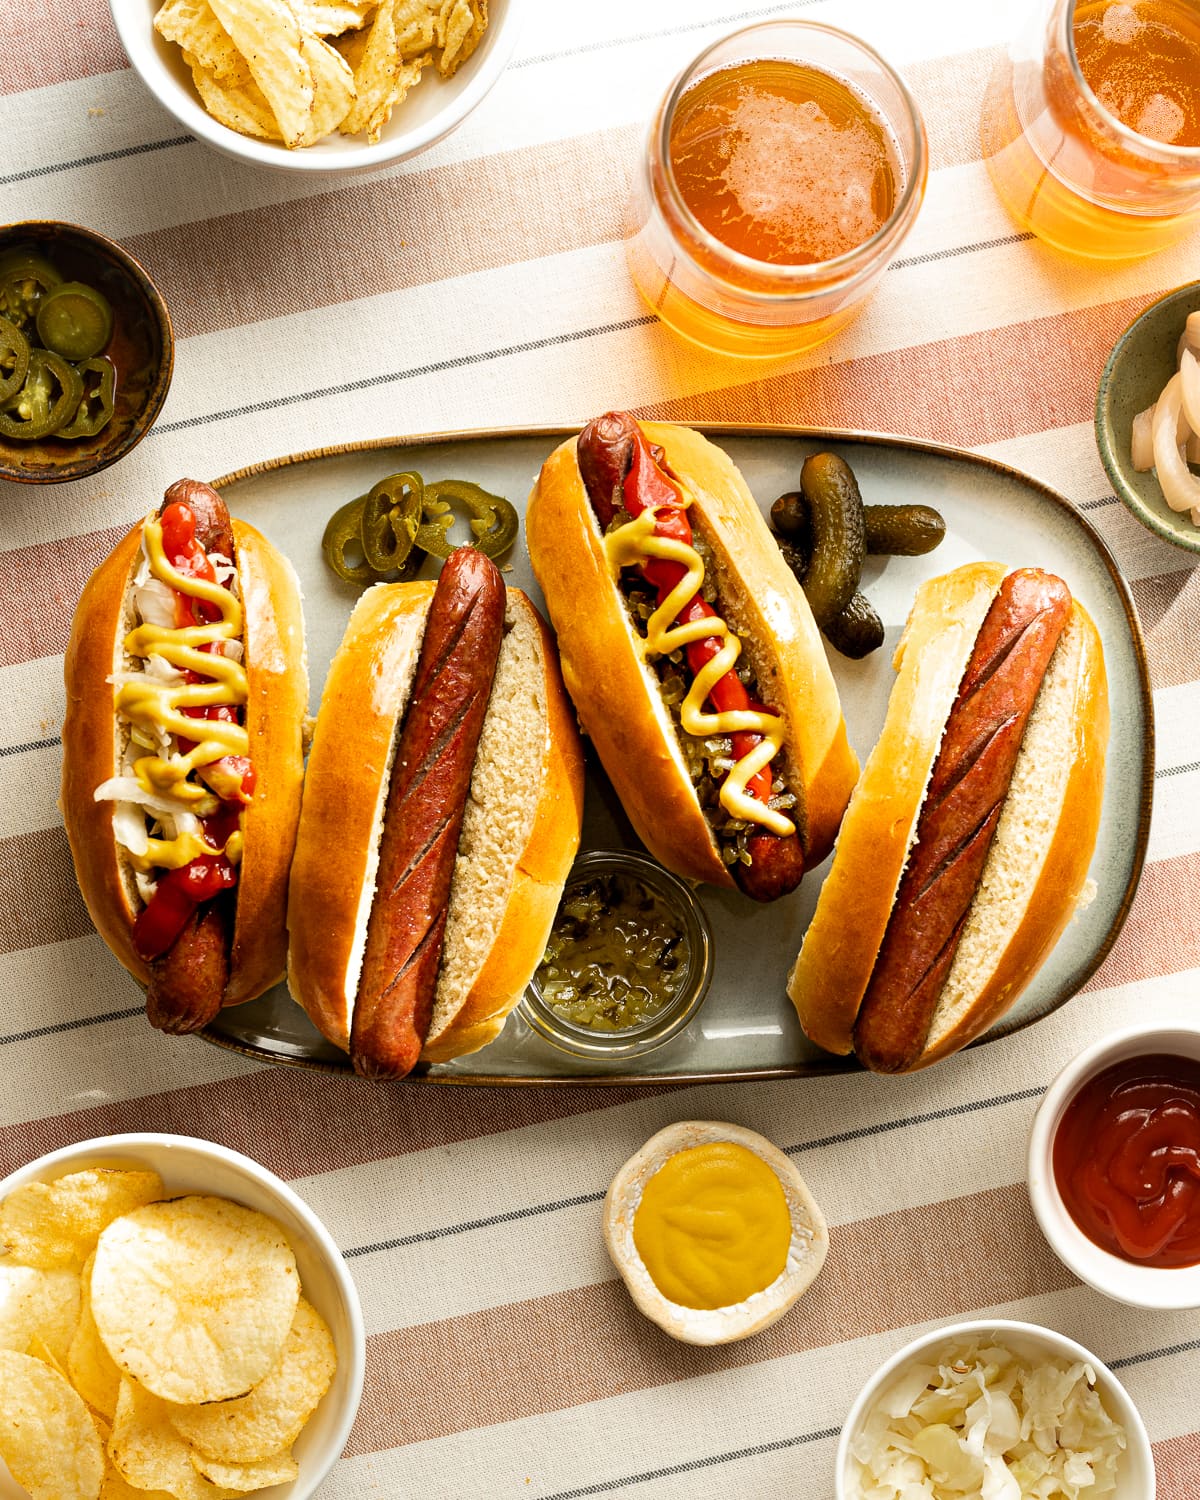 Hot dogs in hot dog buns topped with ketchup, mustard relish and sauerkraut on a platter. 